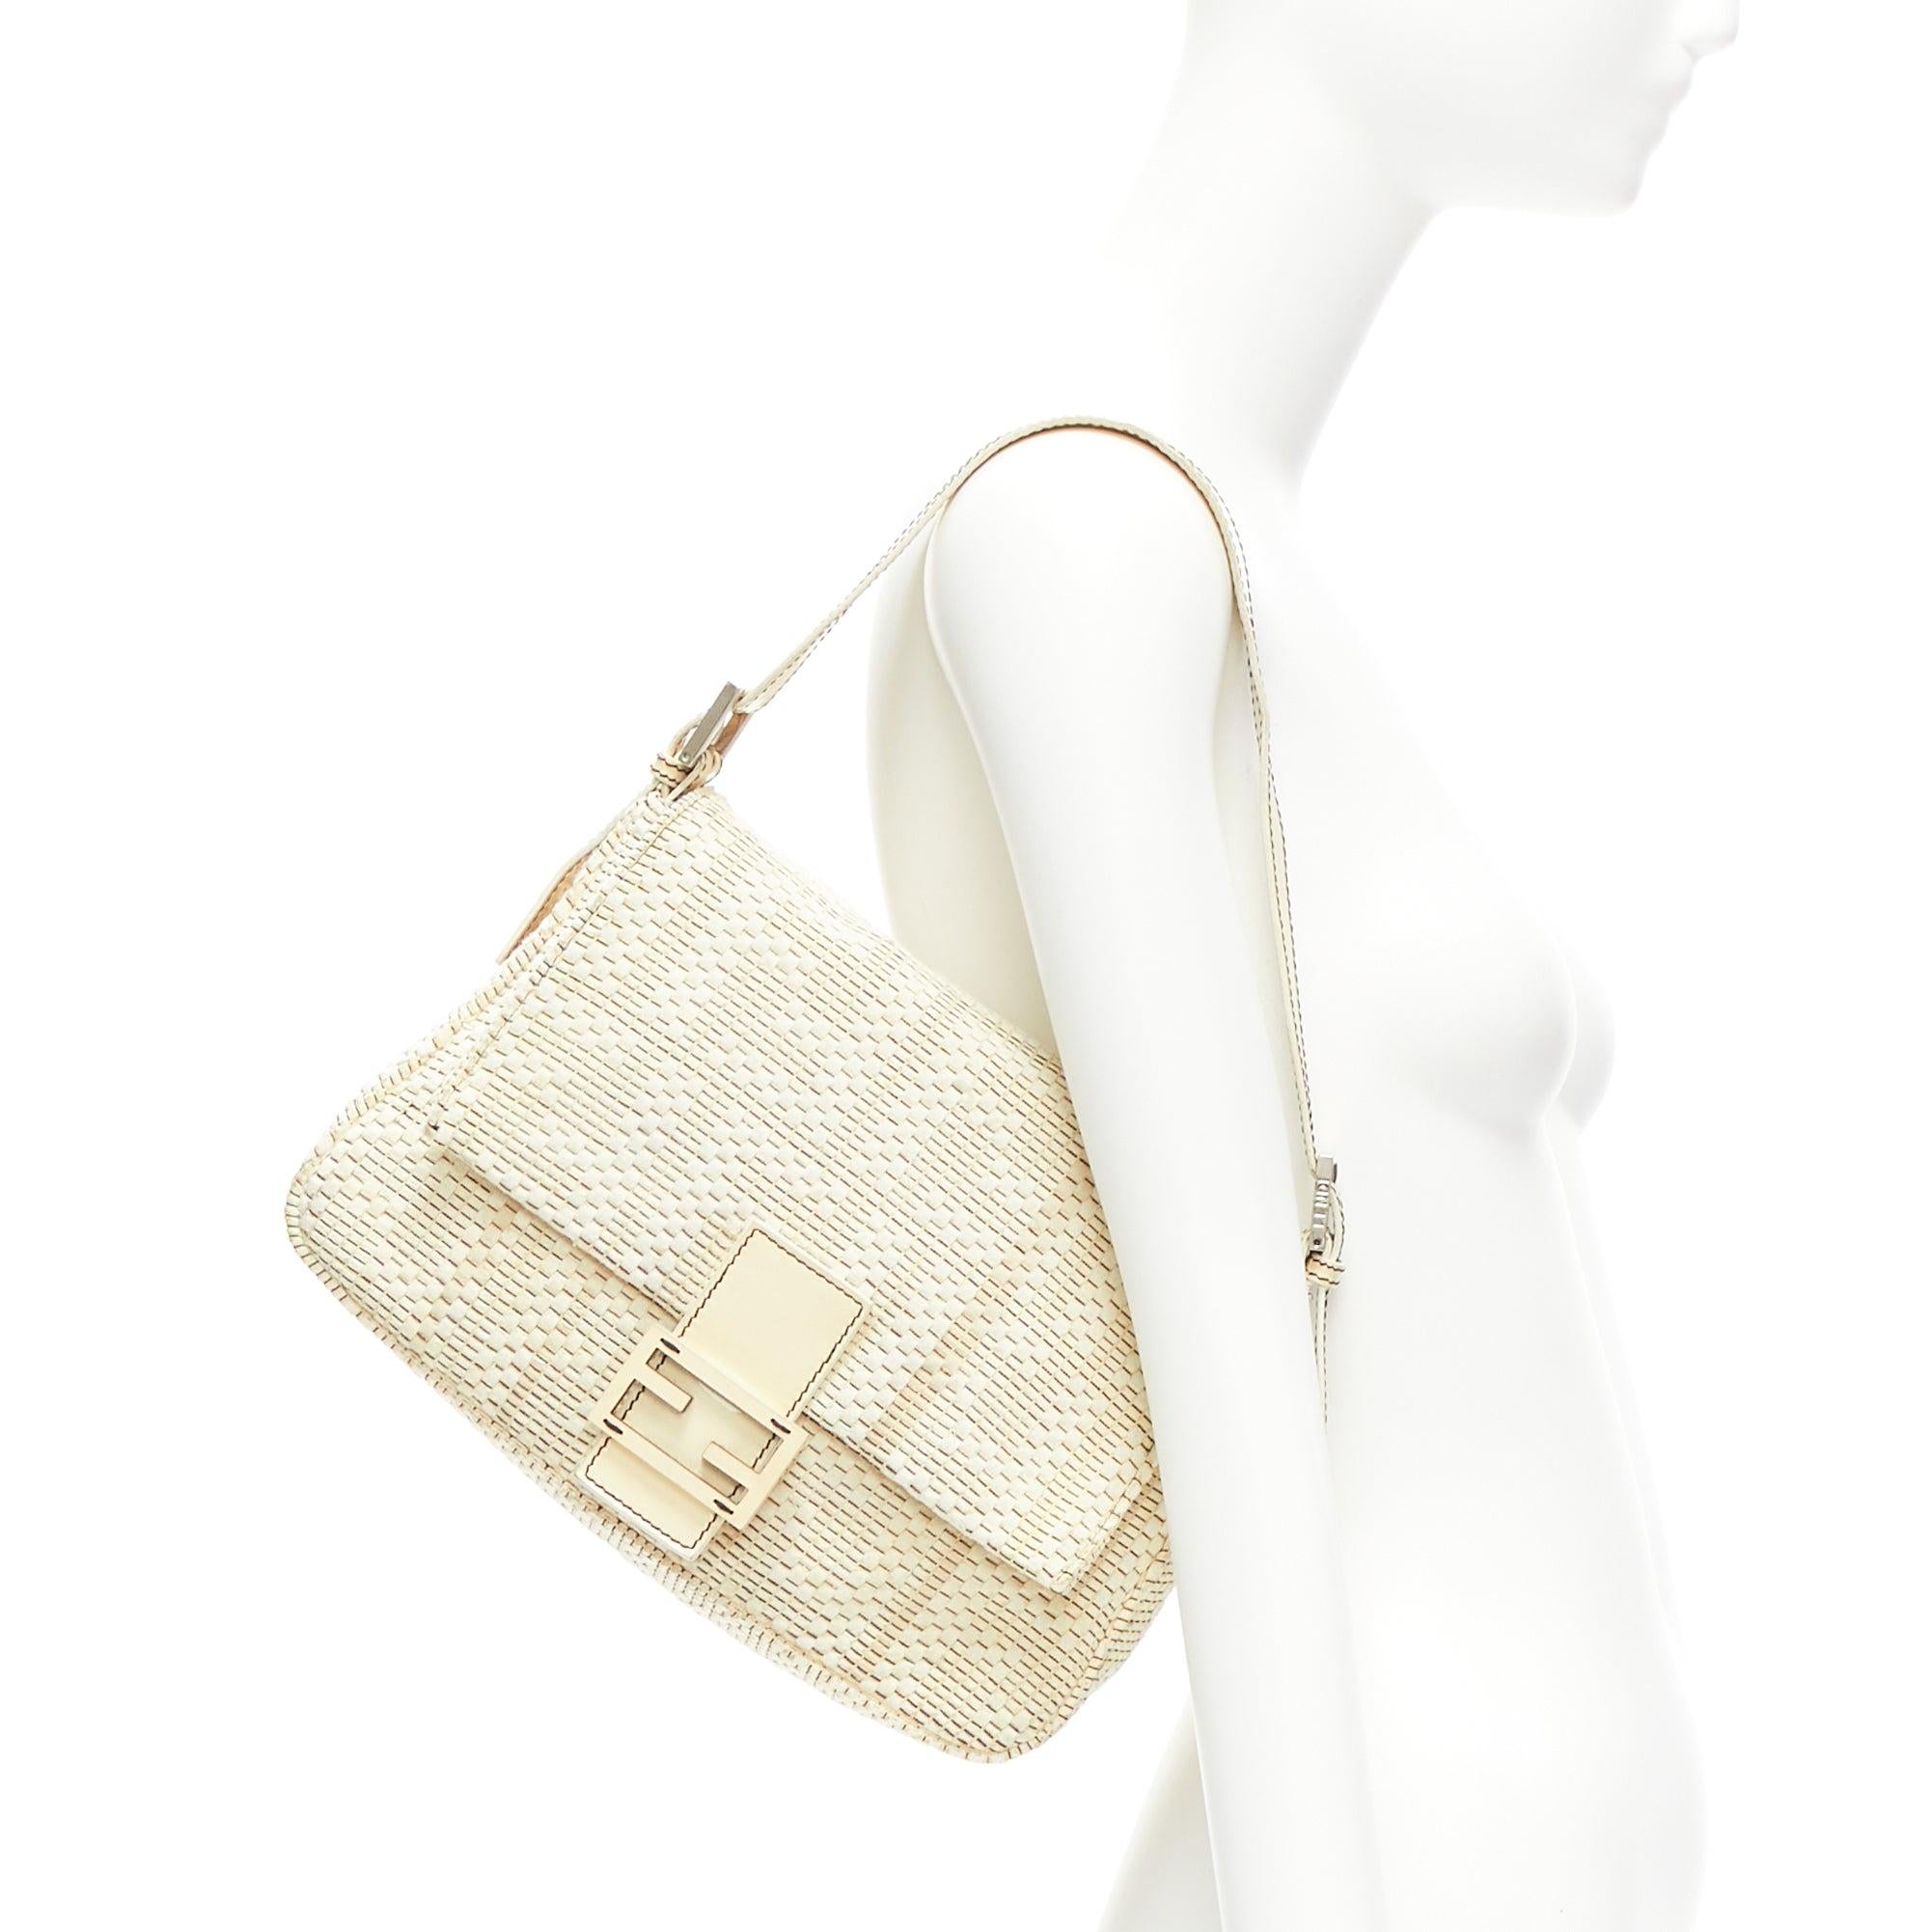 FENDI Vintage Mamma Baguette cream FF Zucca woven fabric underarm bag
Reference: KNCN/A00050
Brand: Fendi
Model: Mamma Baguette
Material: Fabric, Leather, Metal
Color: Cream
Pattern: Solid
Closure: Snap Buttons
Lining: Beige Fabric
Extra Details: FF